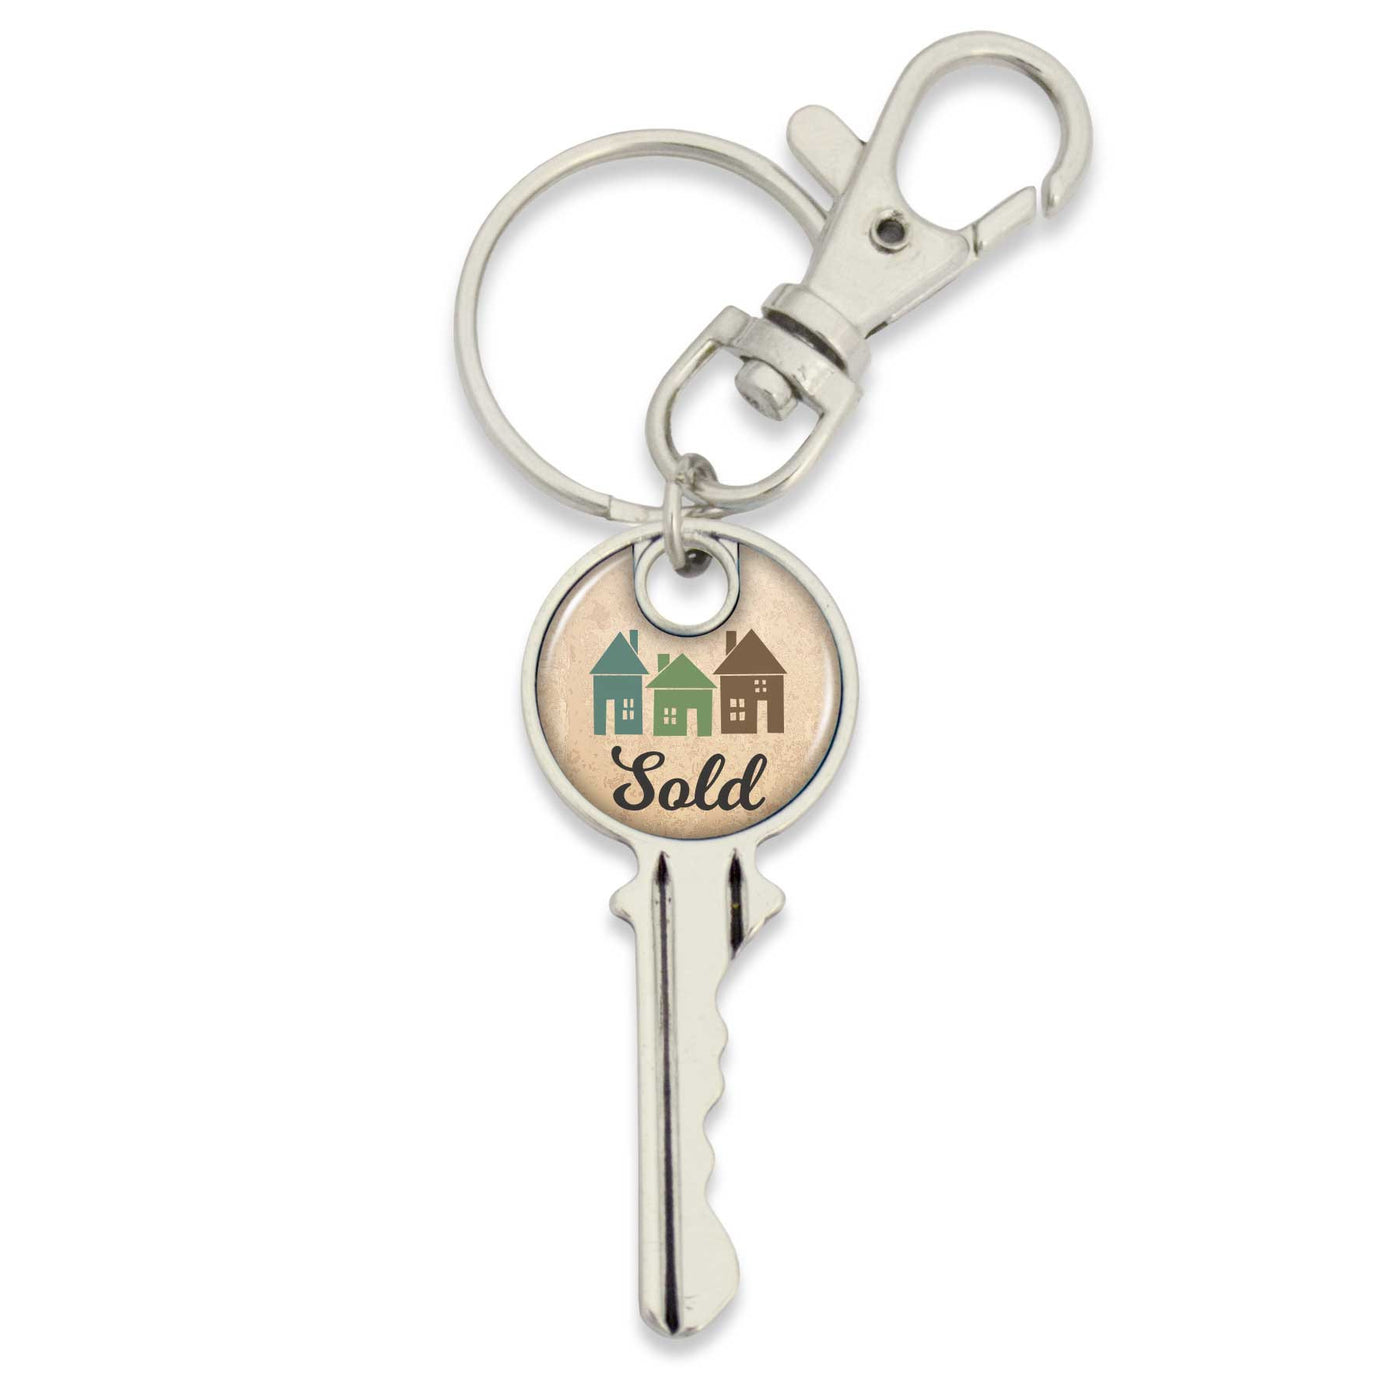 "Sold" Real Estate Key Chain